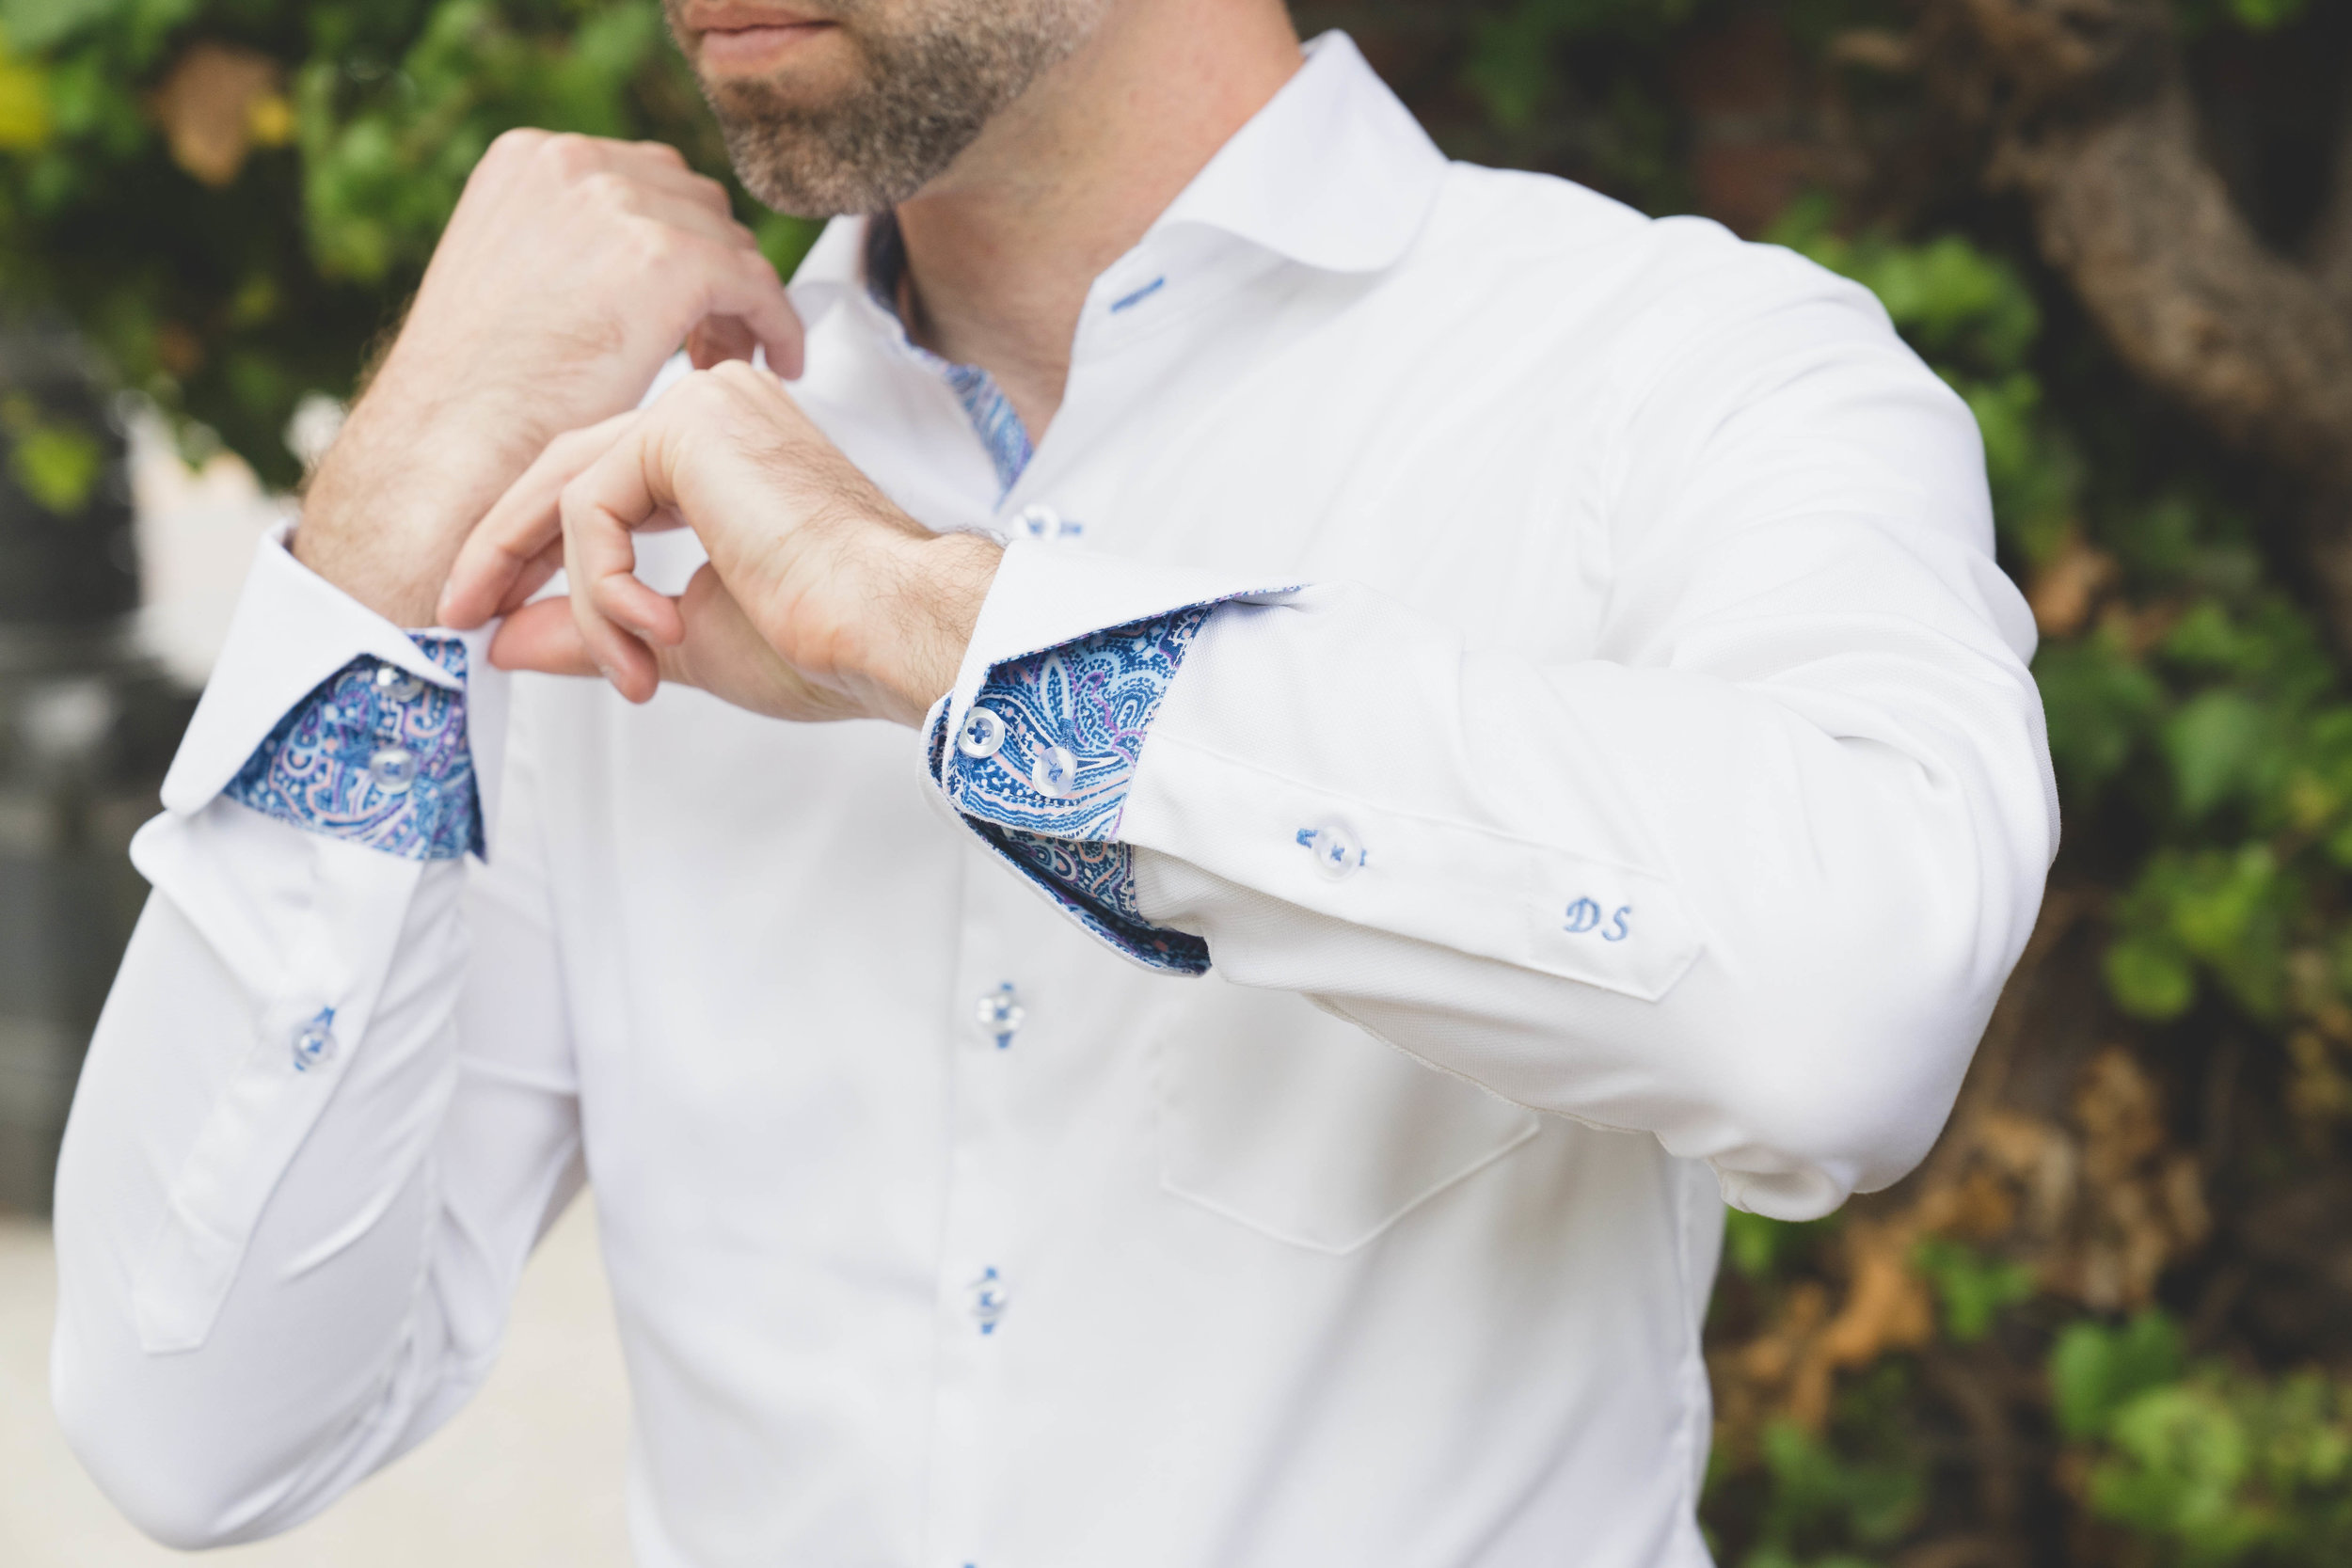 Monogram Rules  Embroidered Initials On Men's Dress Shirts